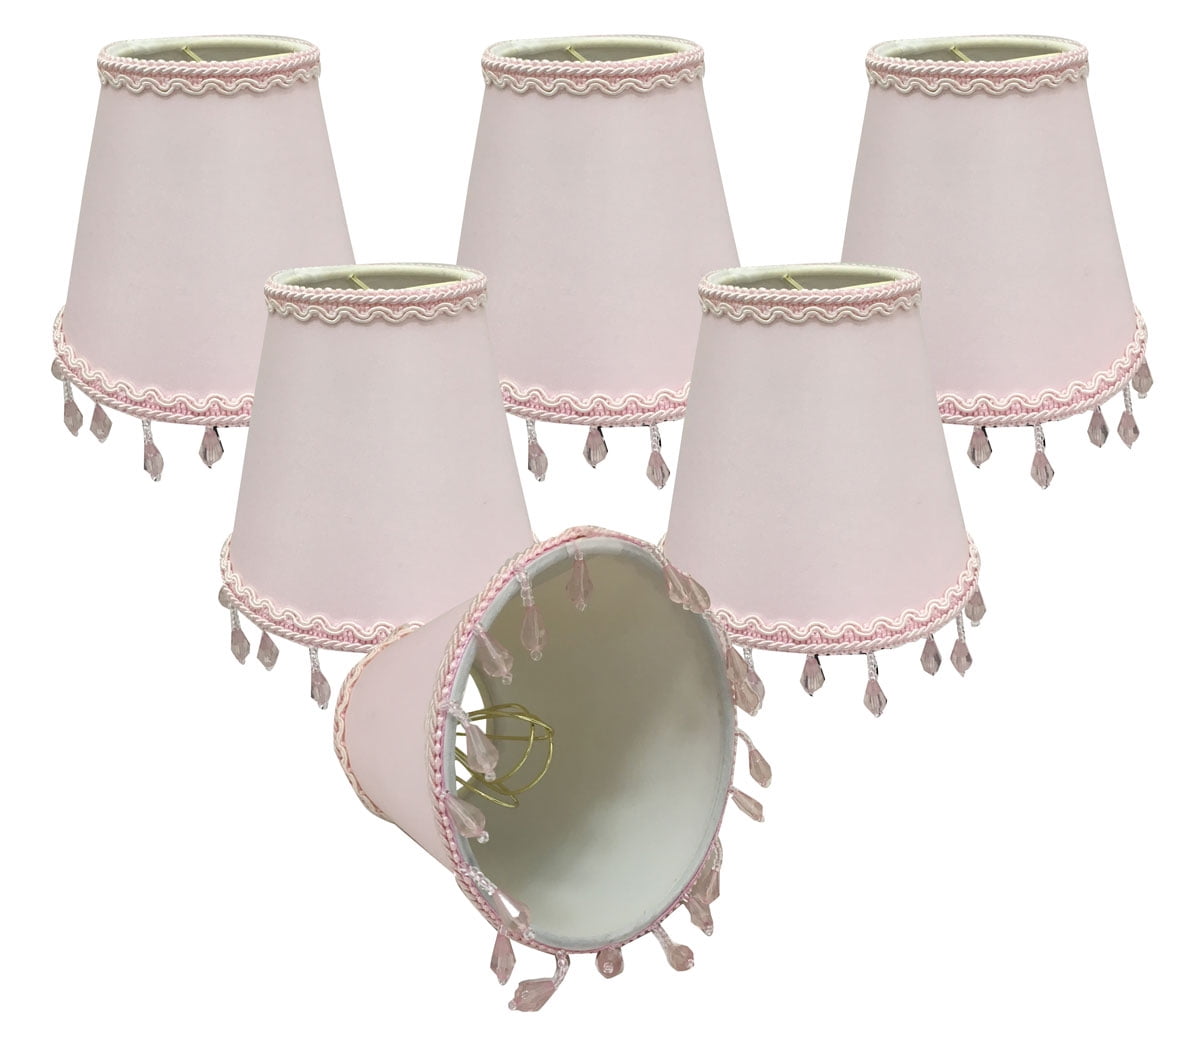 1-5 pack Clip Lamp Shade Chandelier Fabric Modern Style Light Home Decor Bead 